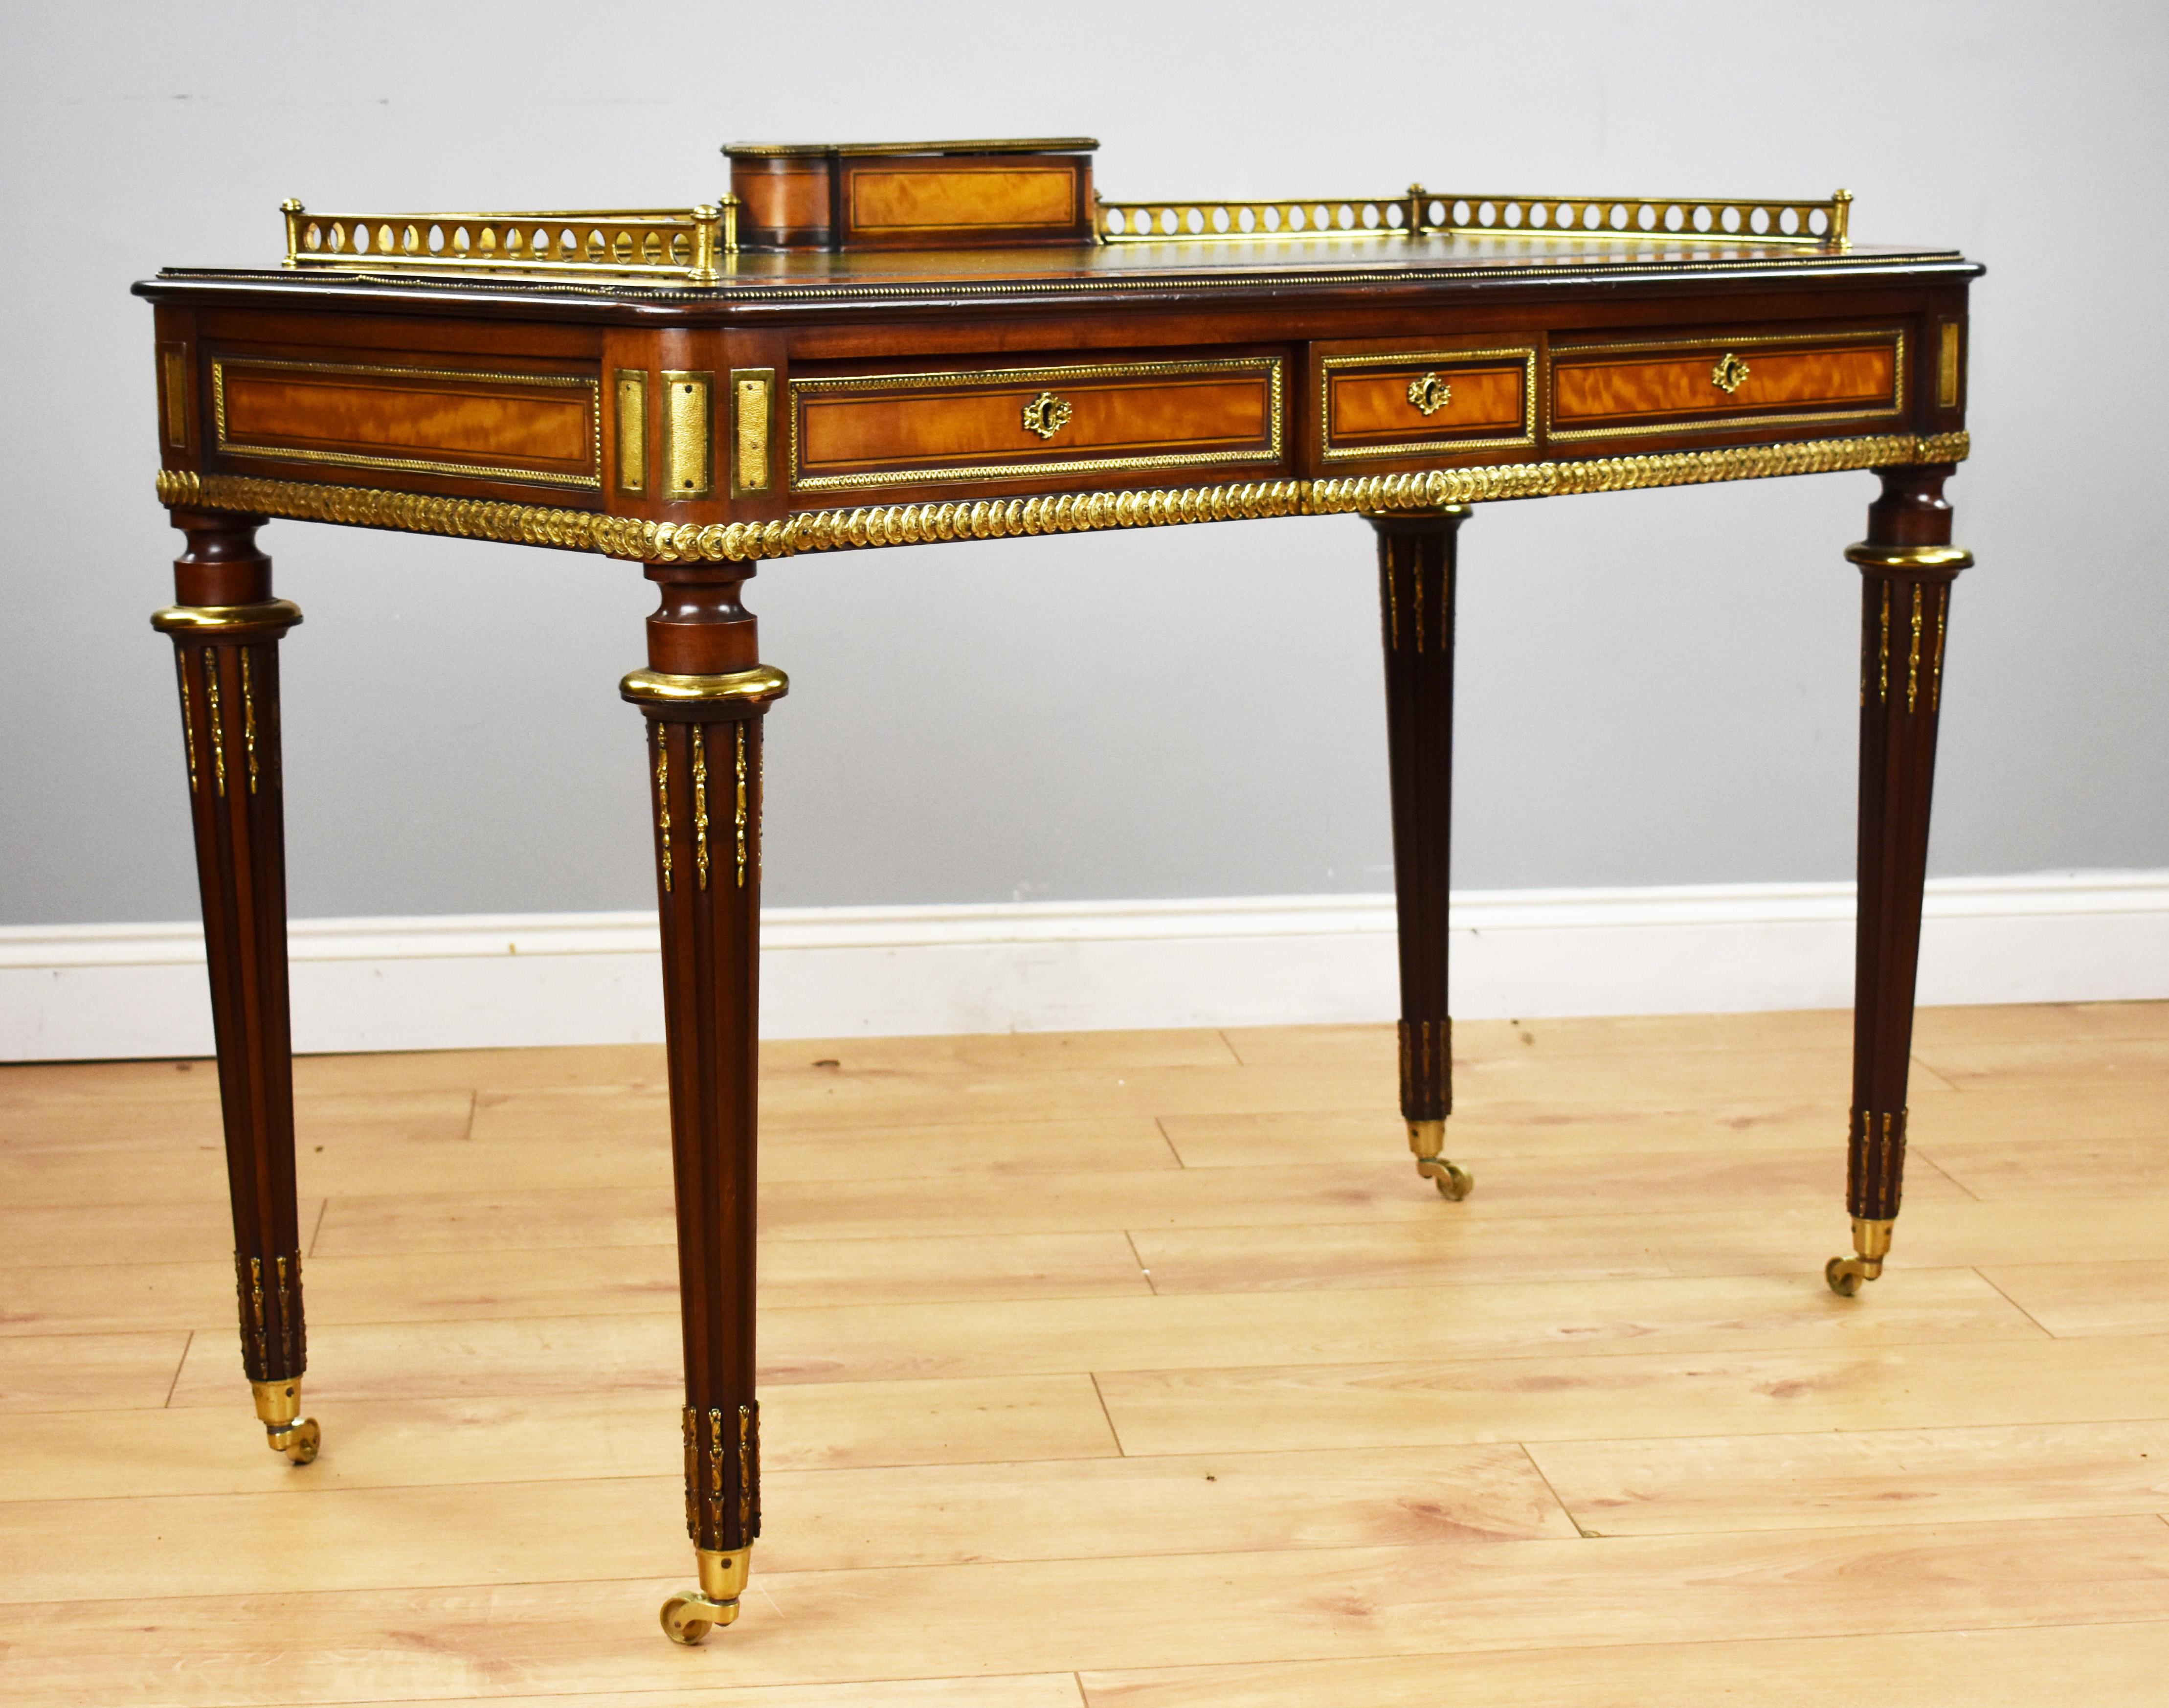 For sale is a top quality 19th century English Victorian mahogany and satinwood writing table stamped Edwards & Roberts. Being constructed from mahogany and fine satinwood the writing table has a writing utensil compartment, with perforated three